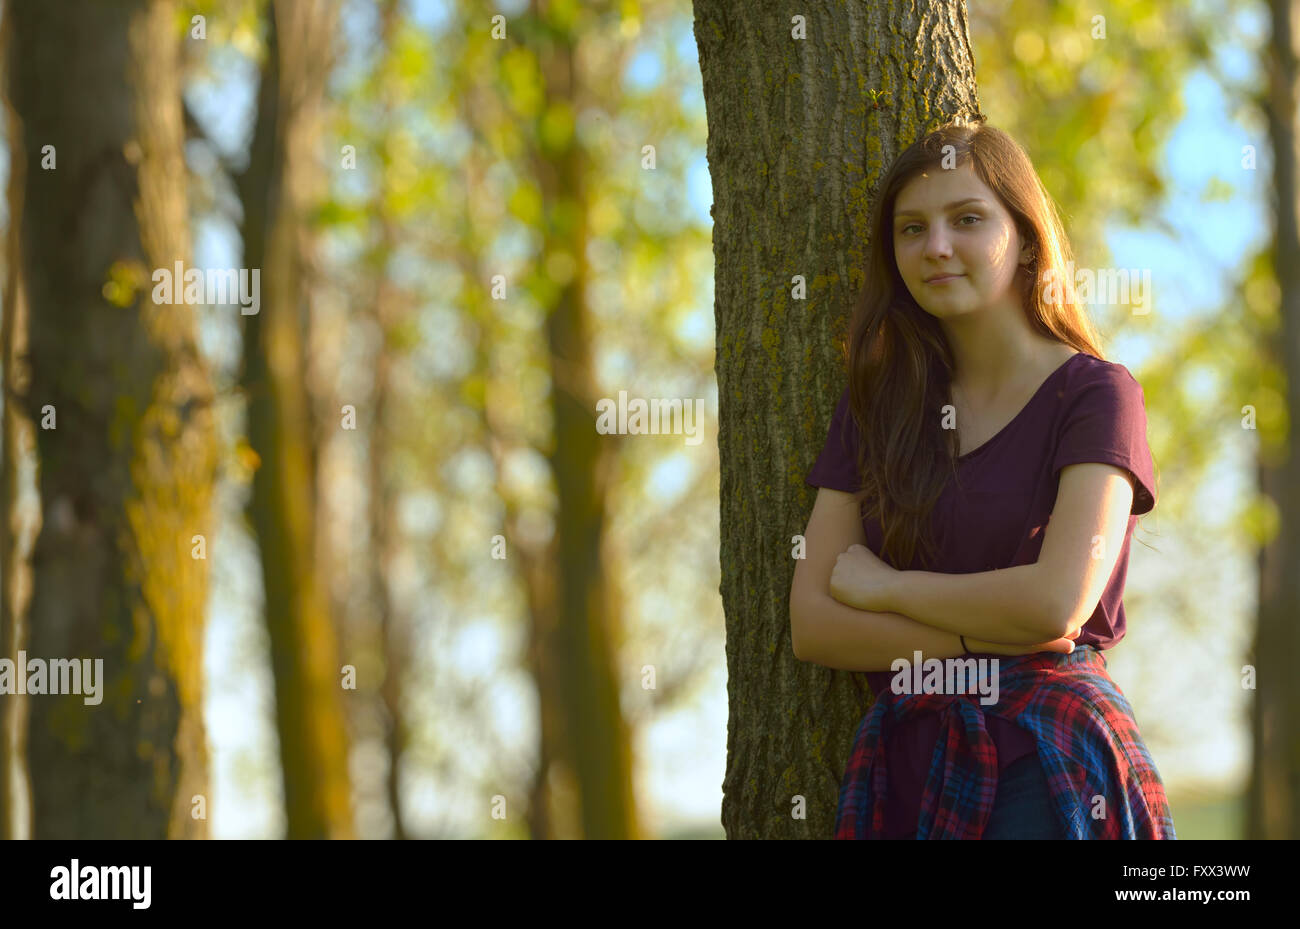 Portrait of a Pretty Teen Girl Standing in a Forest Stock Photo